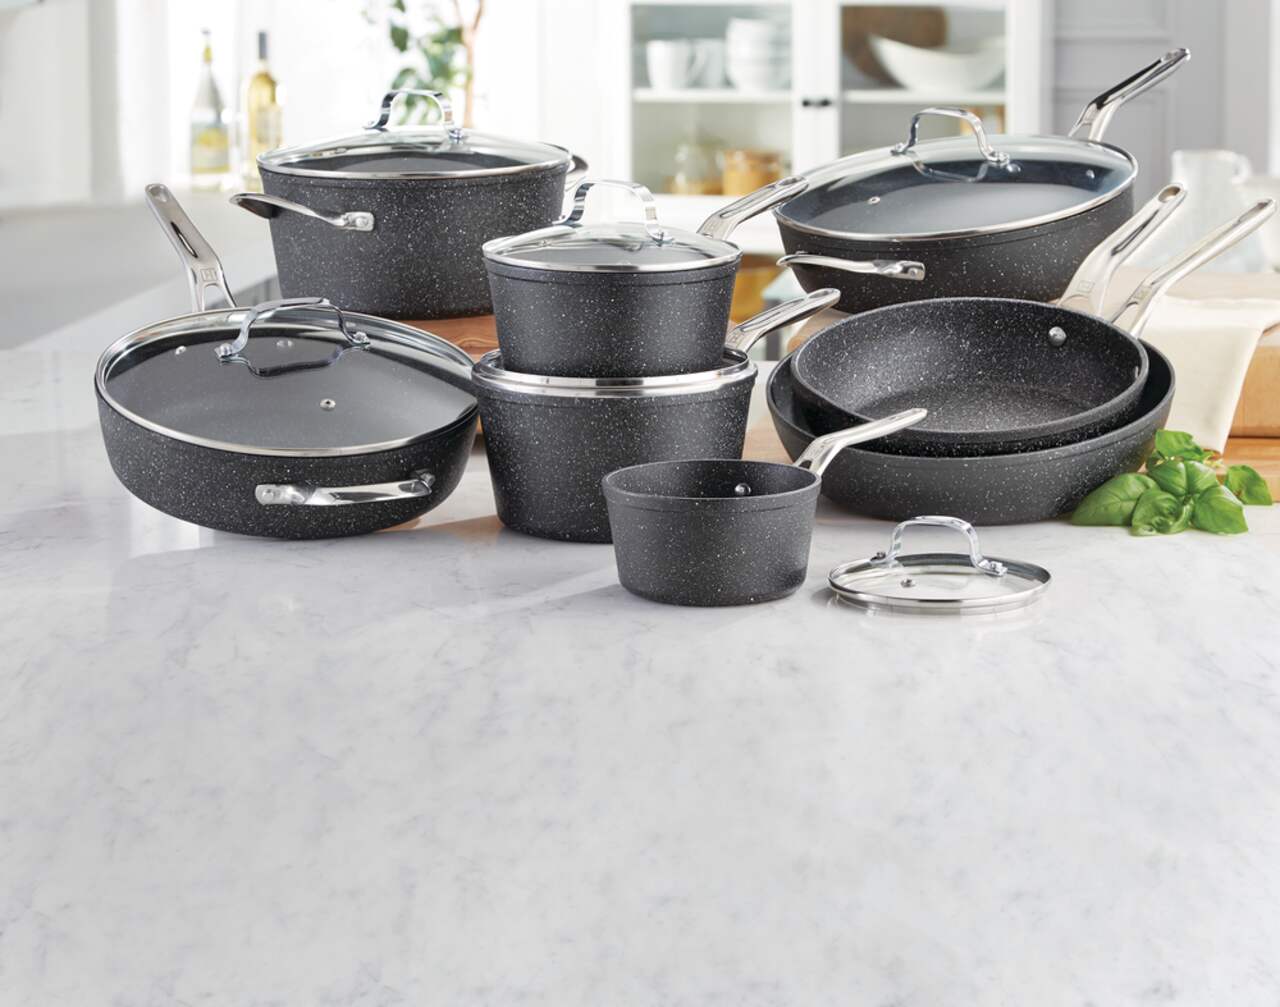 https://media-www.canadiantire.ca/product/living/kitchen/cookware/1427071/heritage-rock-10pc-forged-non-stick-b432028a-4086-442e-be2f-0b51f7b32737.png?imdensity=1&imwidth=1244&impolicy=mZoom